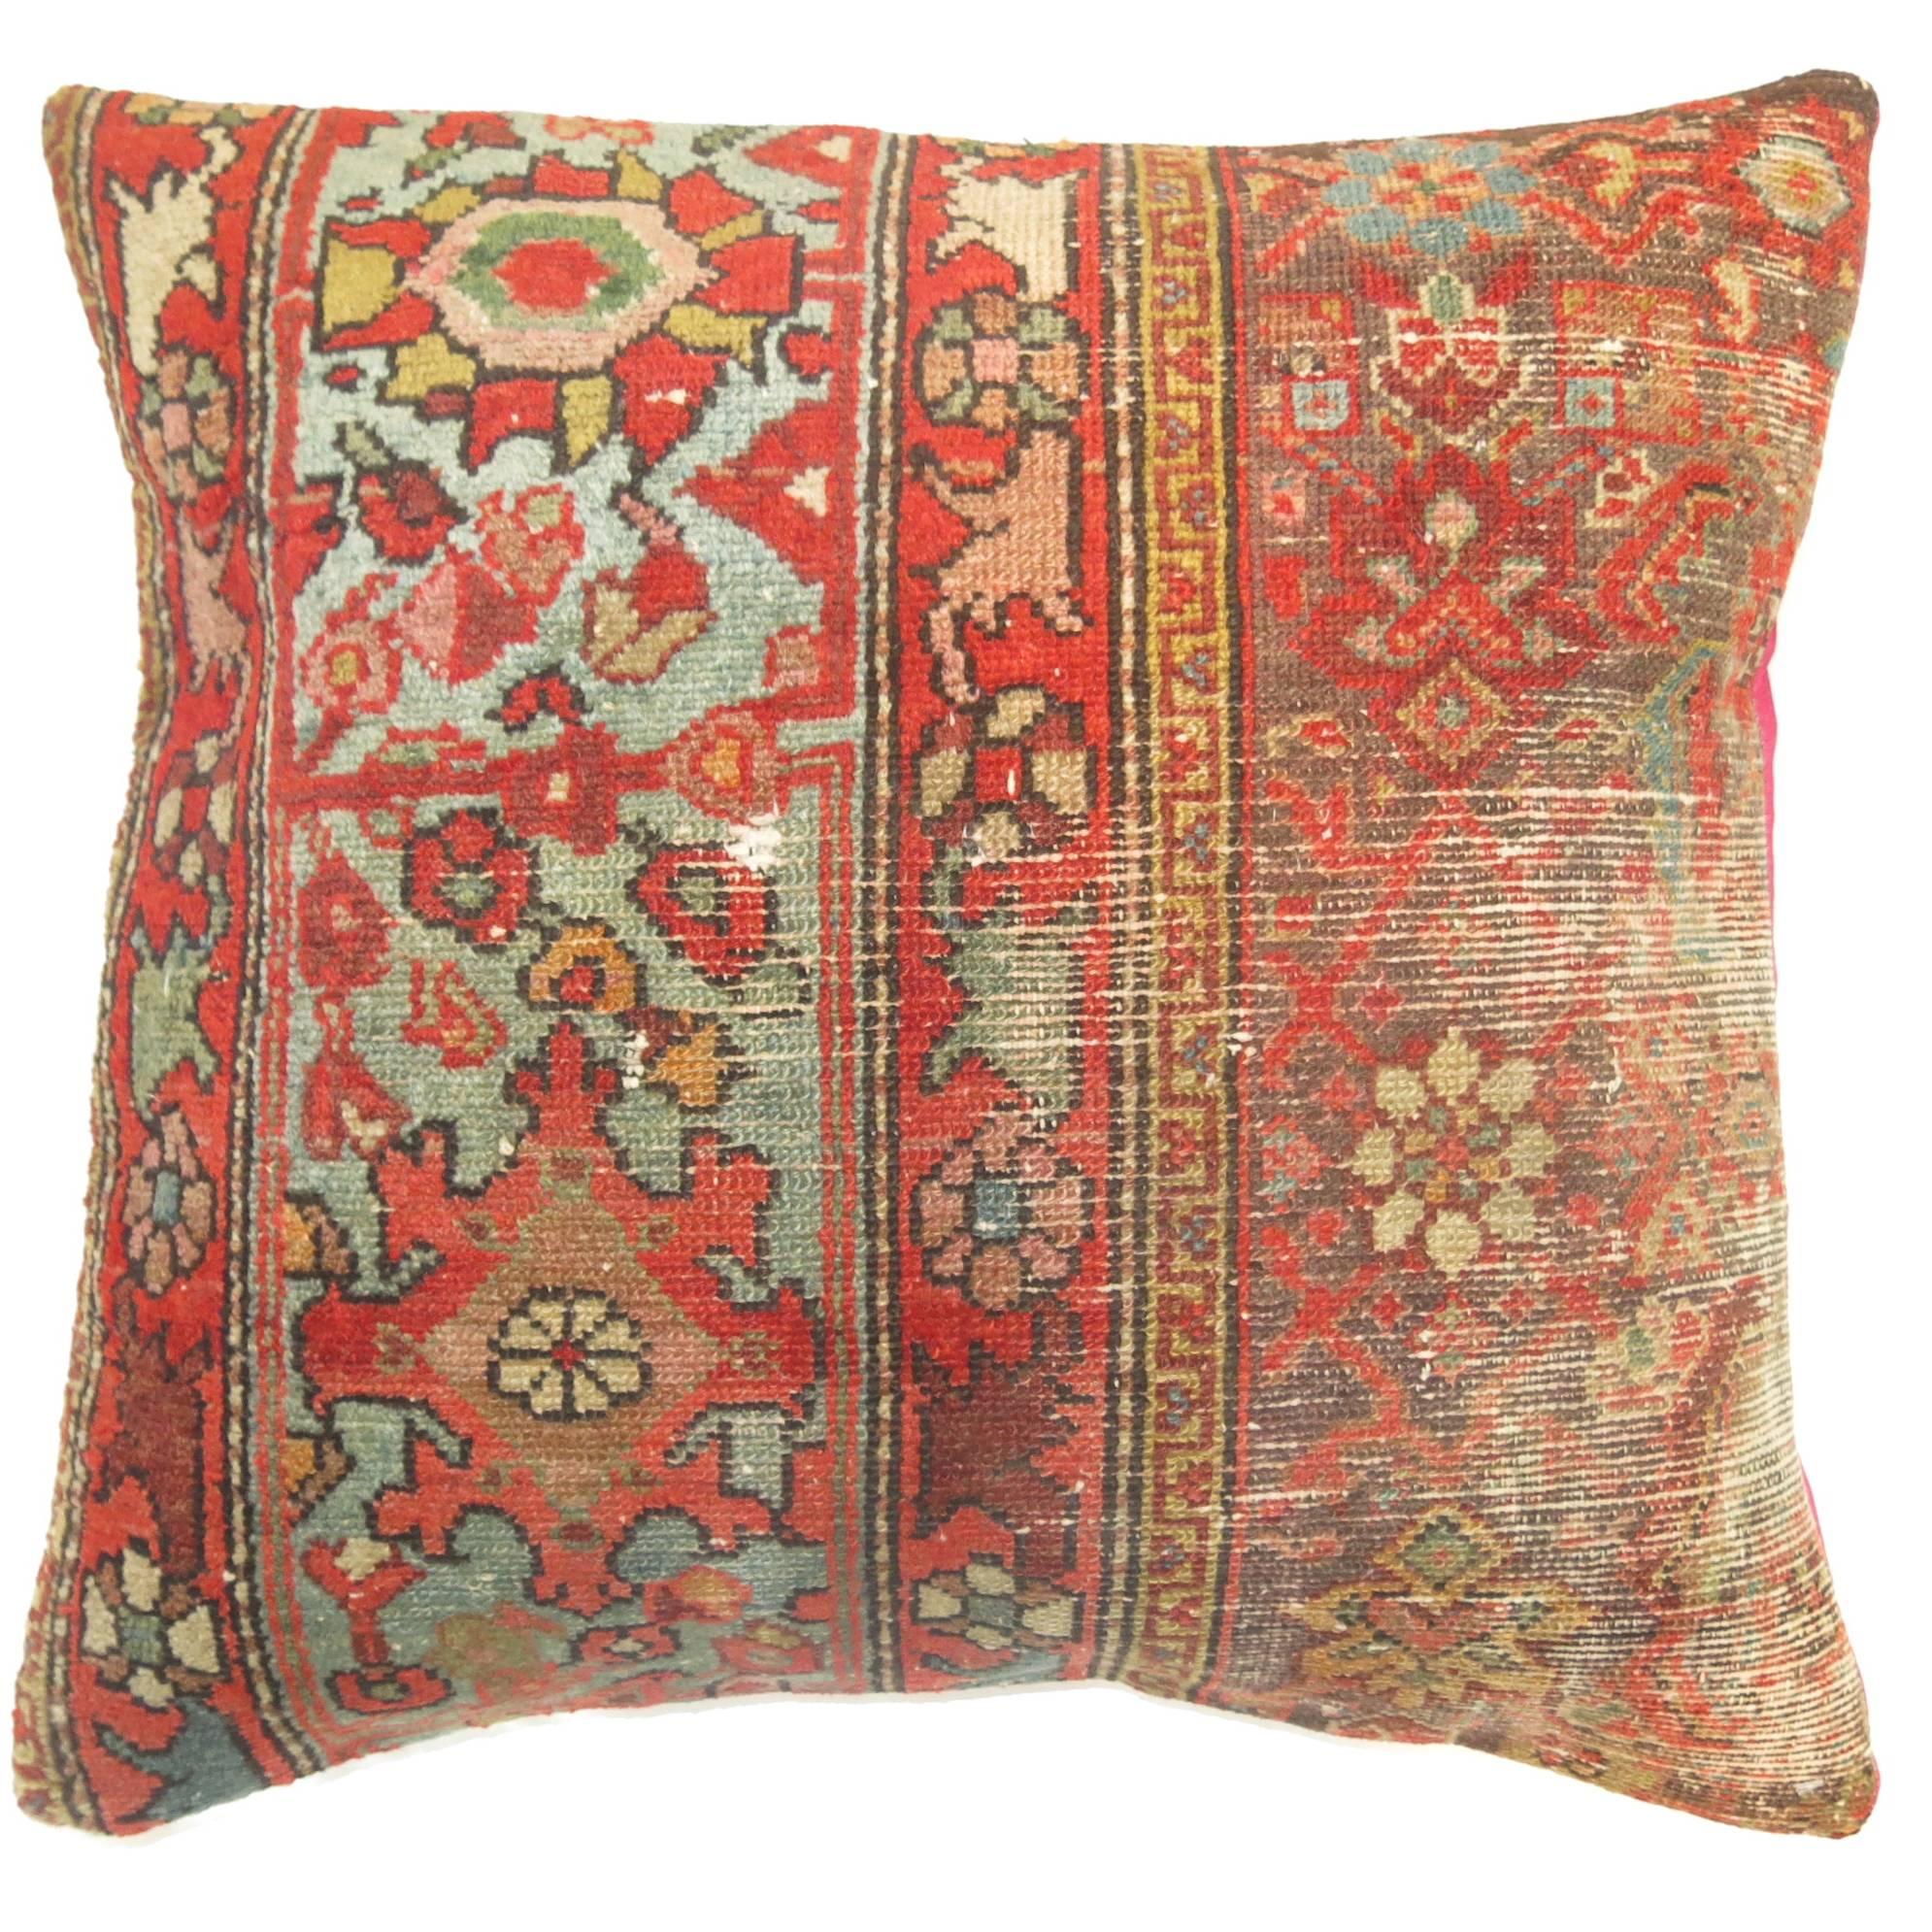 Shabby Chic Persian Pillow with Pink Backing